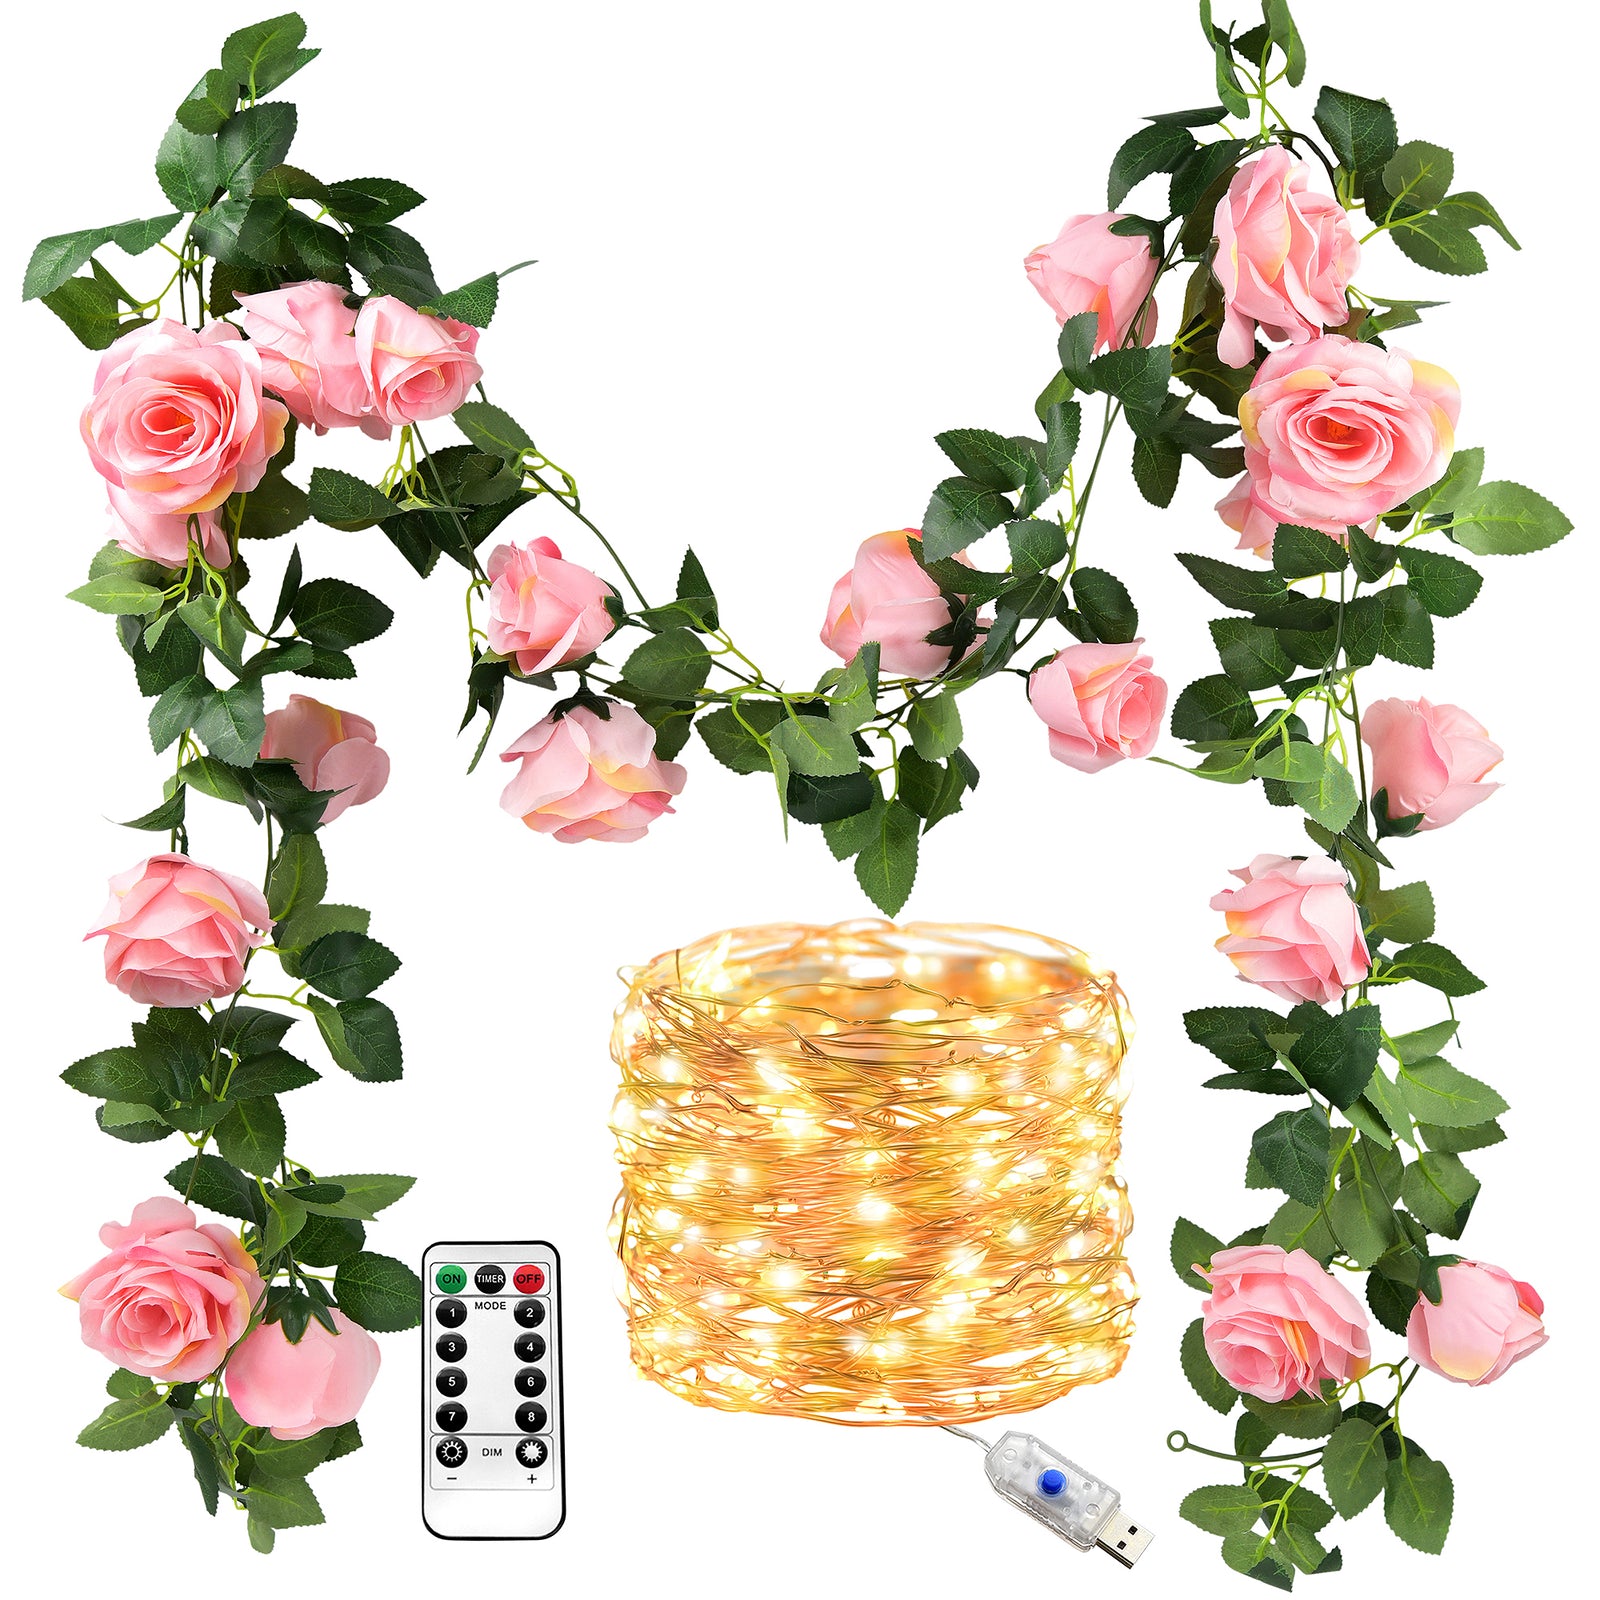 14 Ft 2 Pack Amaranth Pink Rose Silk Flower Garland Artificial Flowers Decoration Hanging Floral with 33 feet String Lights